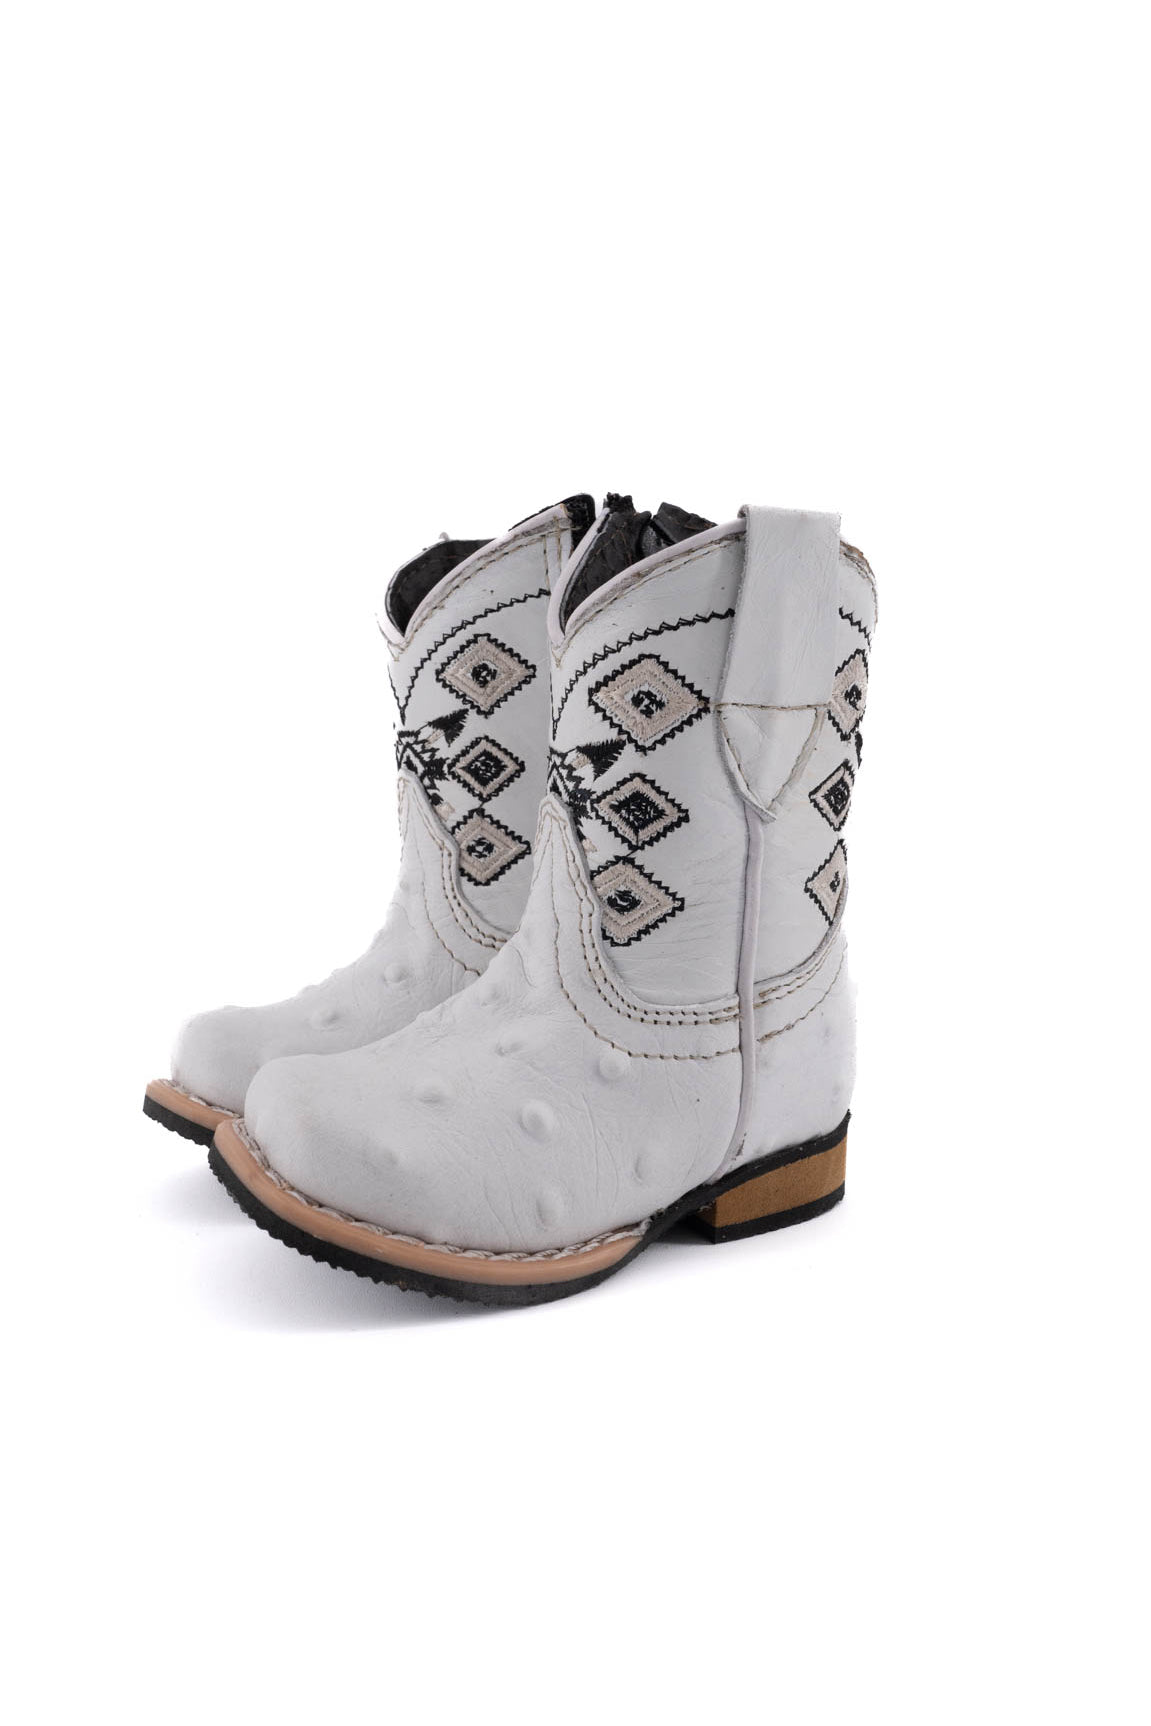 Baby Rodeo Ostrich Cowboy Boots